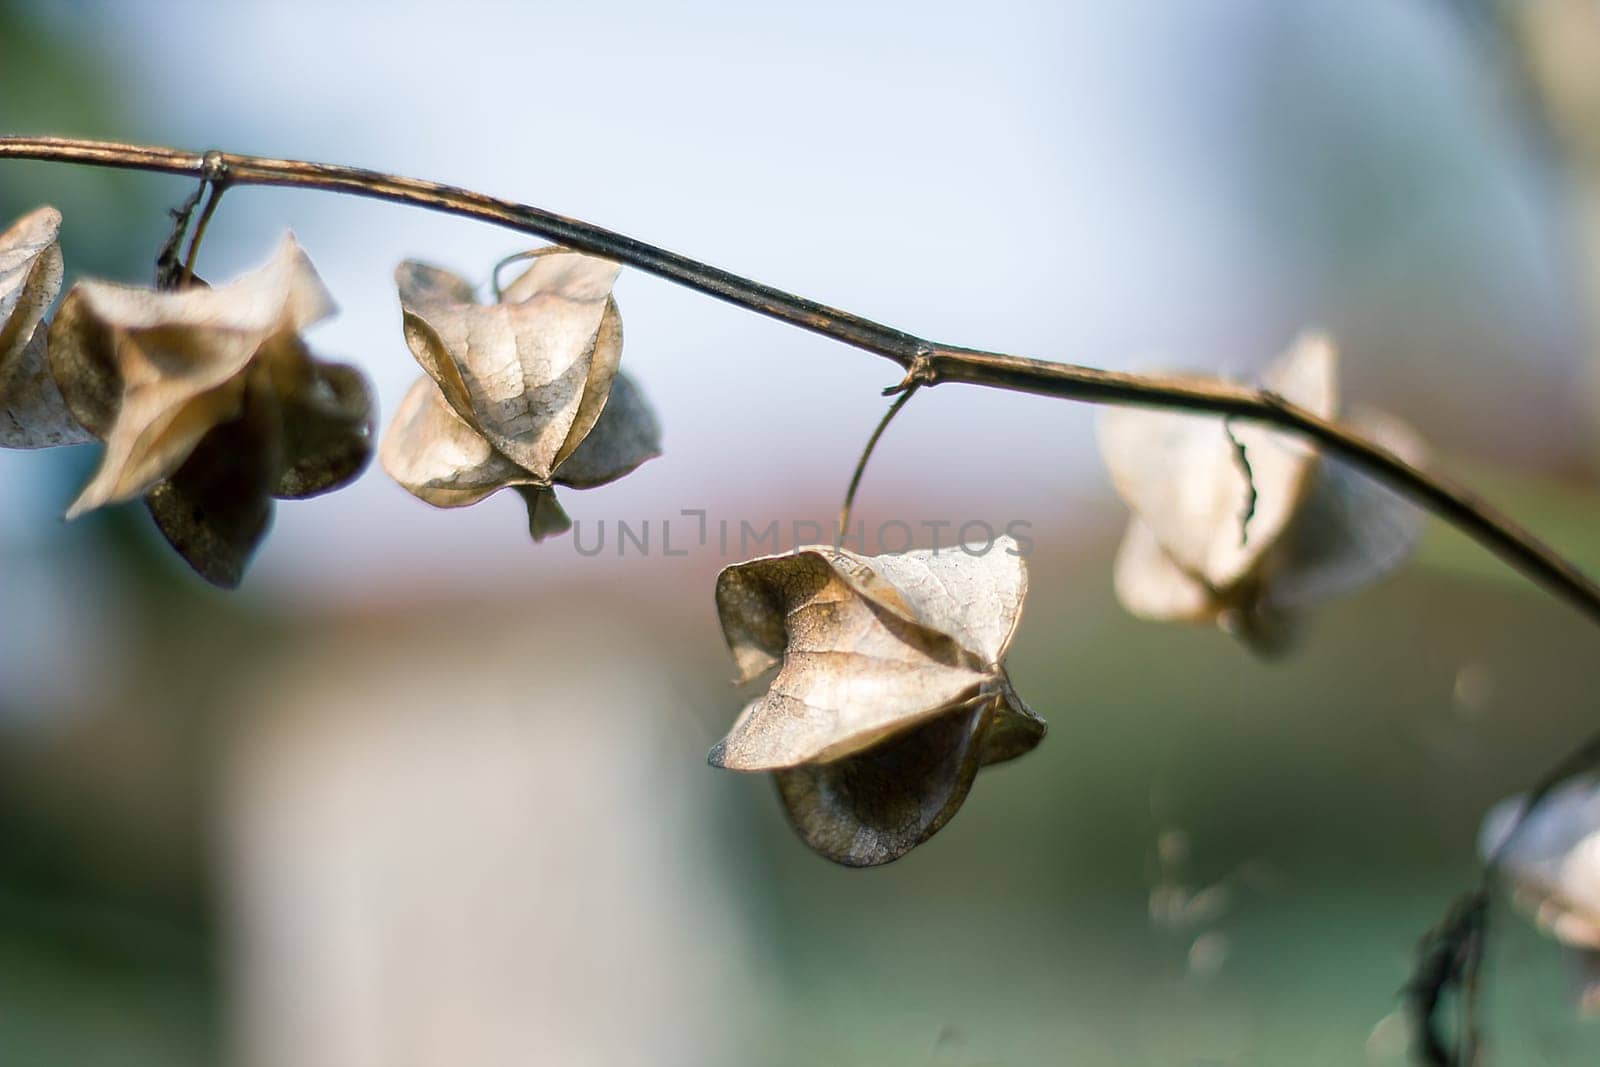 Physalis angulata is dry, another type of Thai herb that is found along the way.